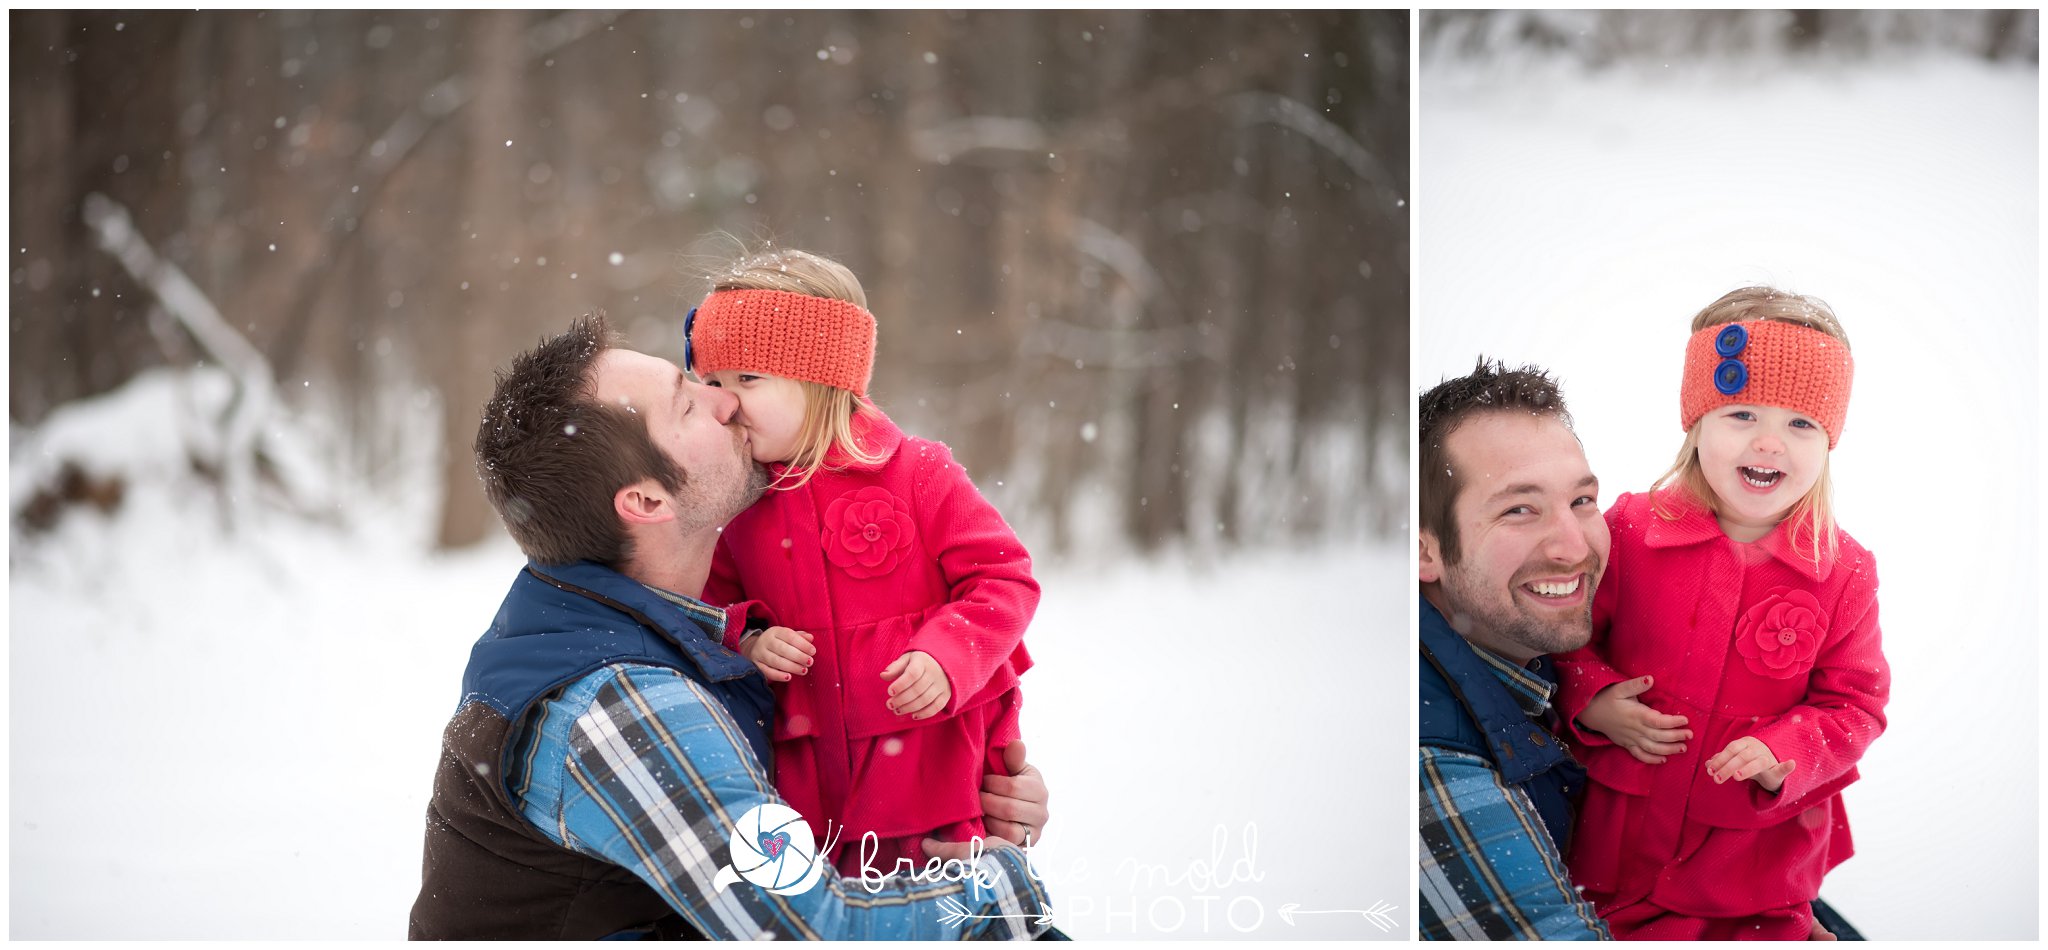 break-the-mold-photo-snowy-day-engagement-photos-knoxville-tn-tennessee-snow-day-pictures-winter-outdoor-unique-family_1517.jpg